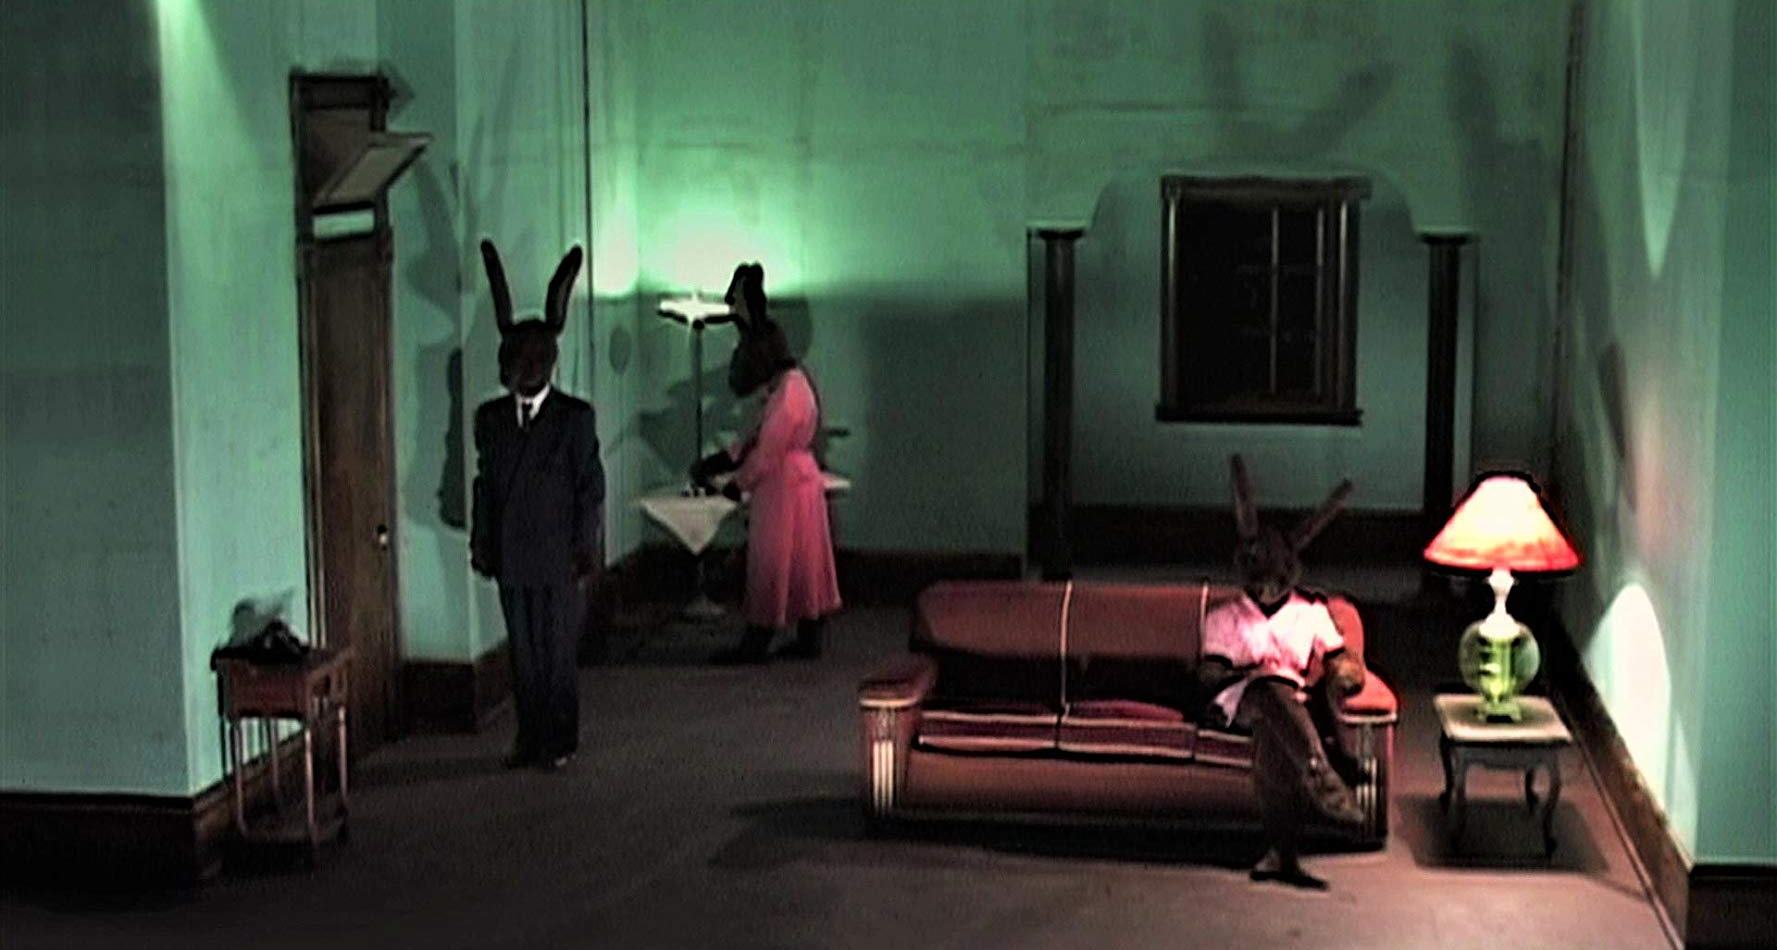 The suburban lives of rabbits in Inland Empire (2006). (With Naomi Watts and Laura Elena Harring from Mulholland Dr, under the masks)